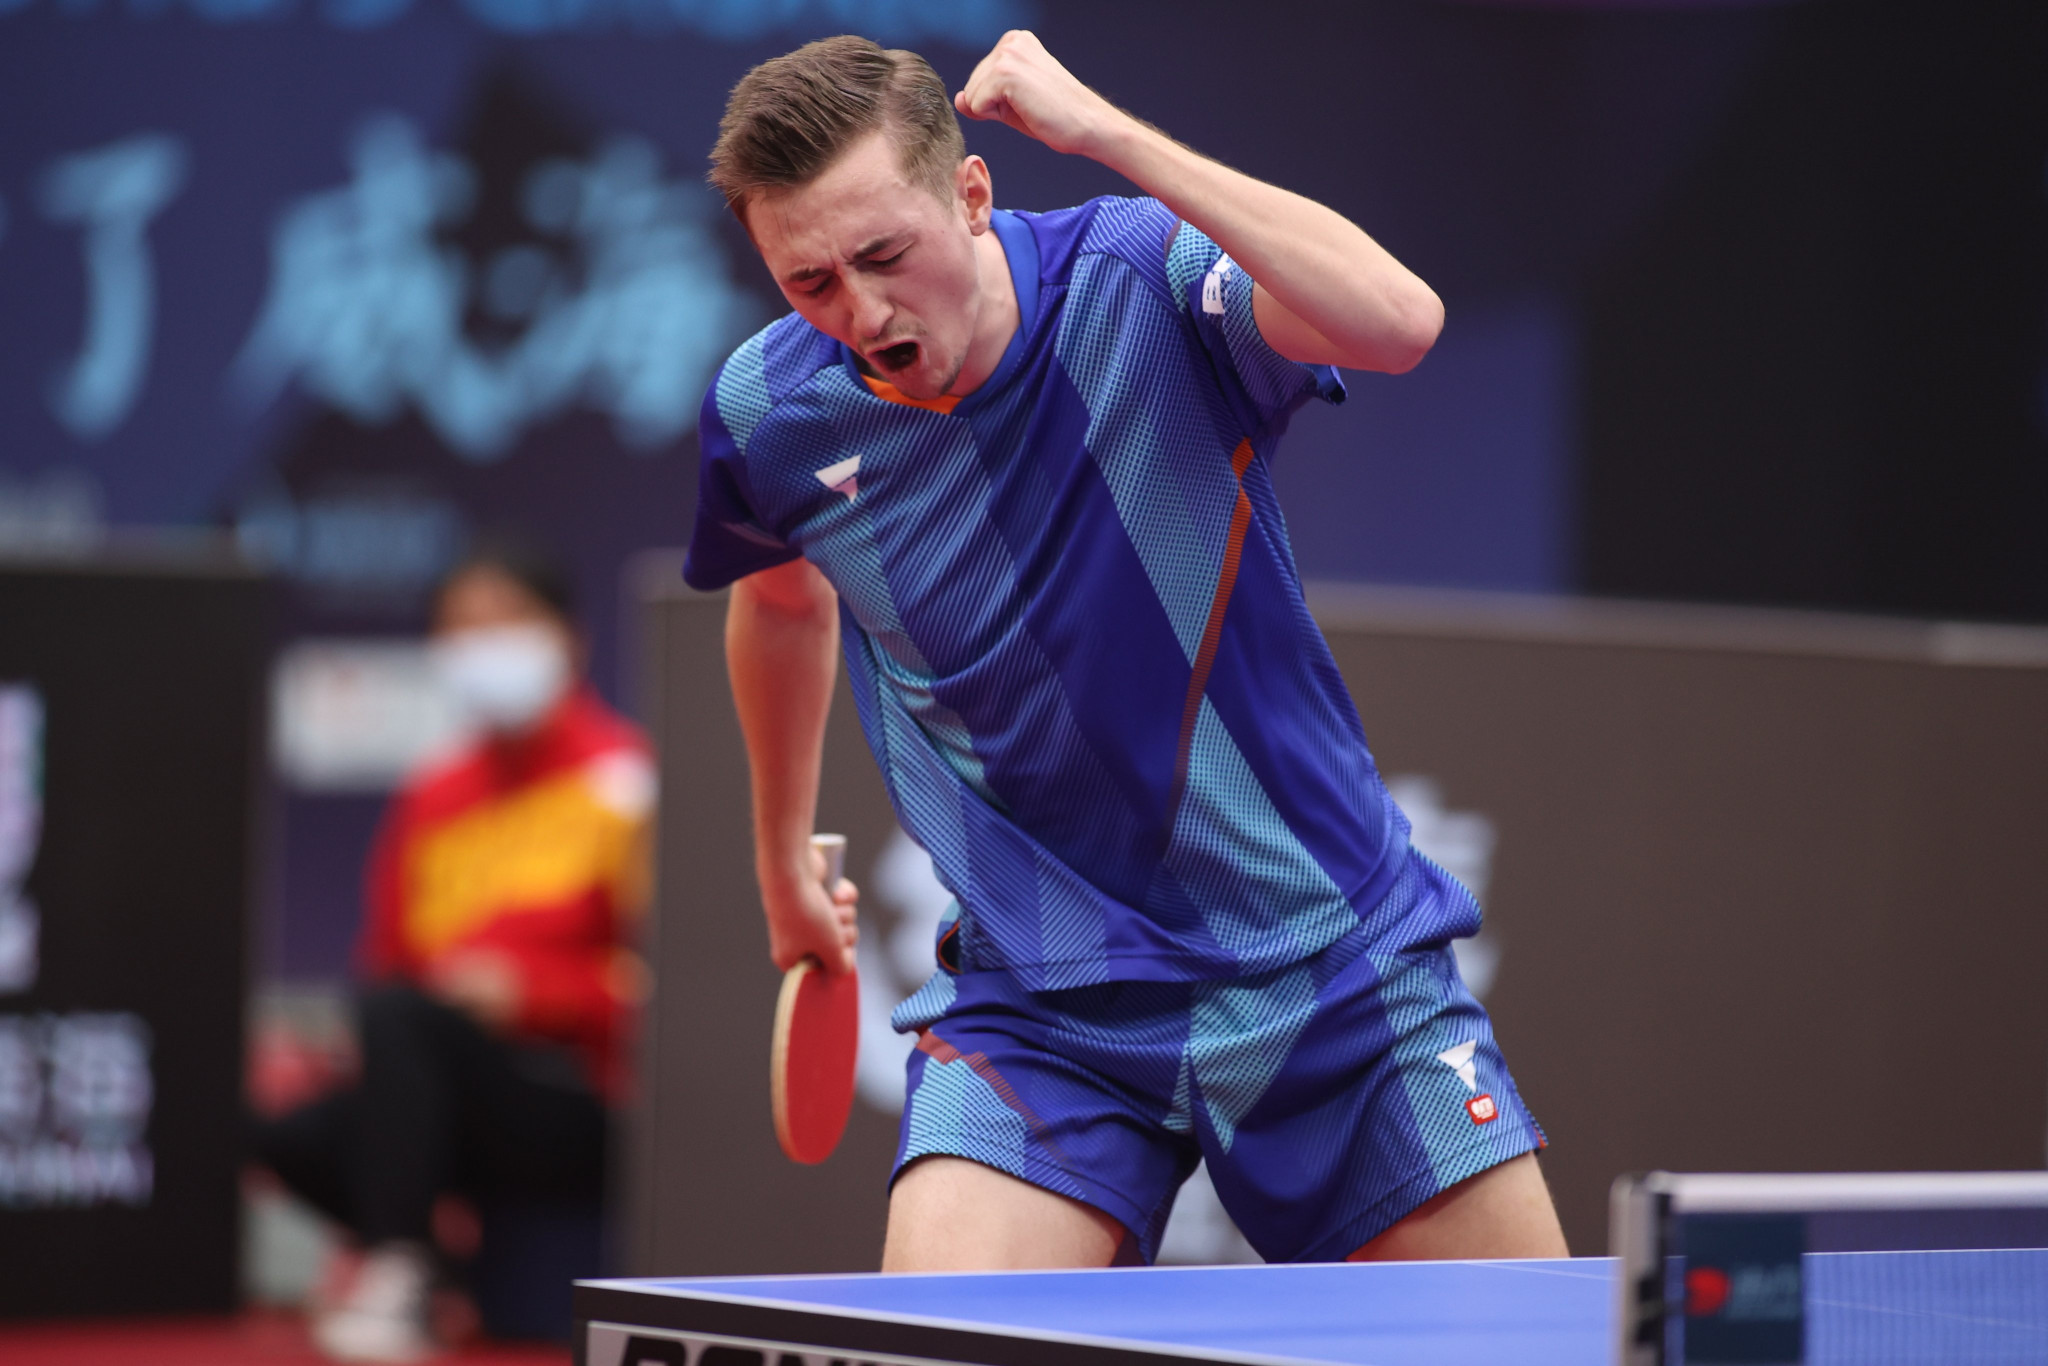 Pitchford impresses on first day of ITTF Men’s World Cup in Weihai